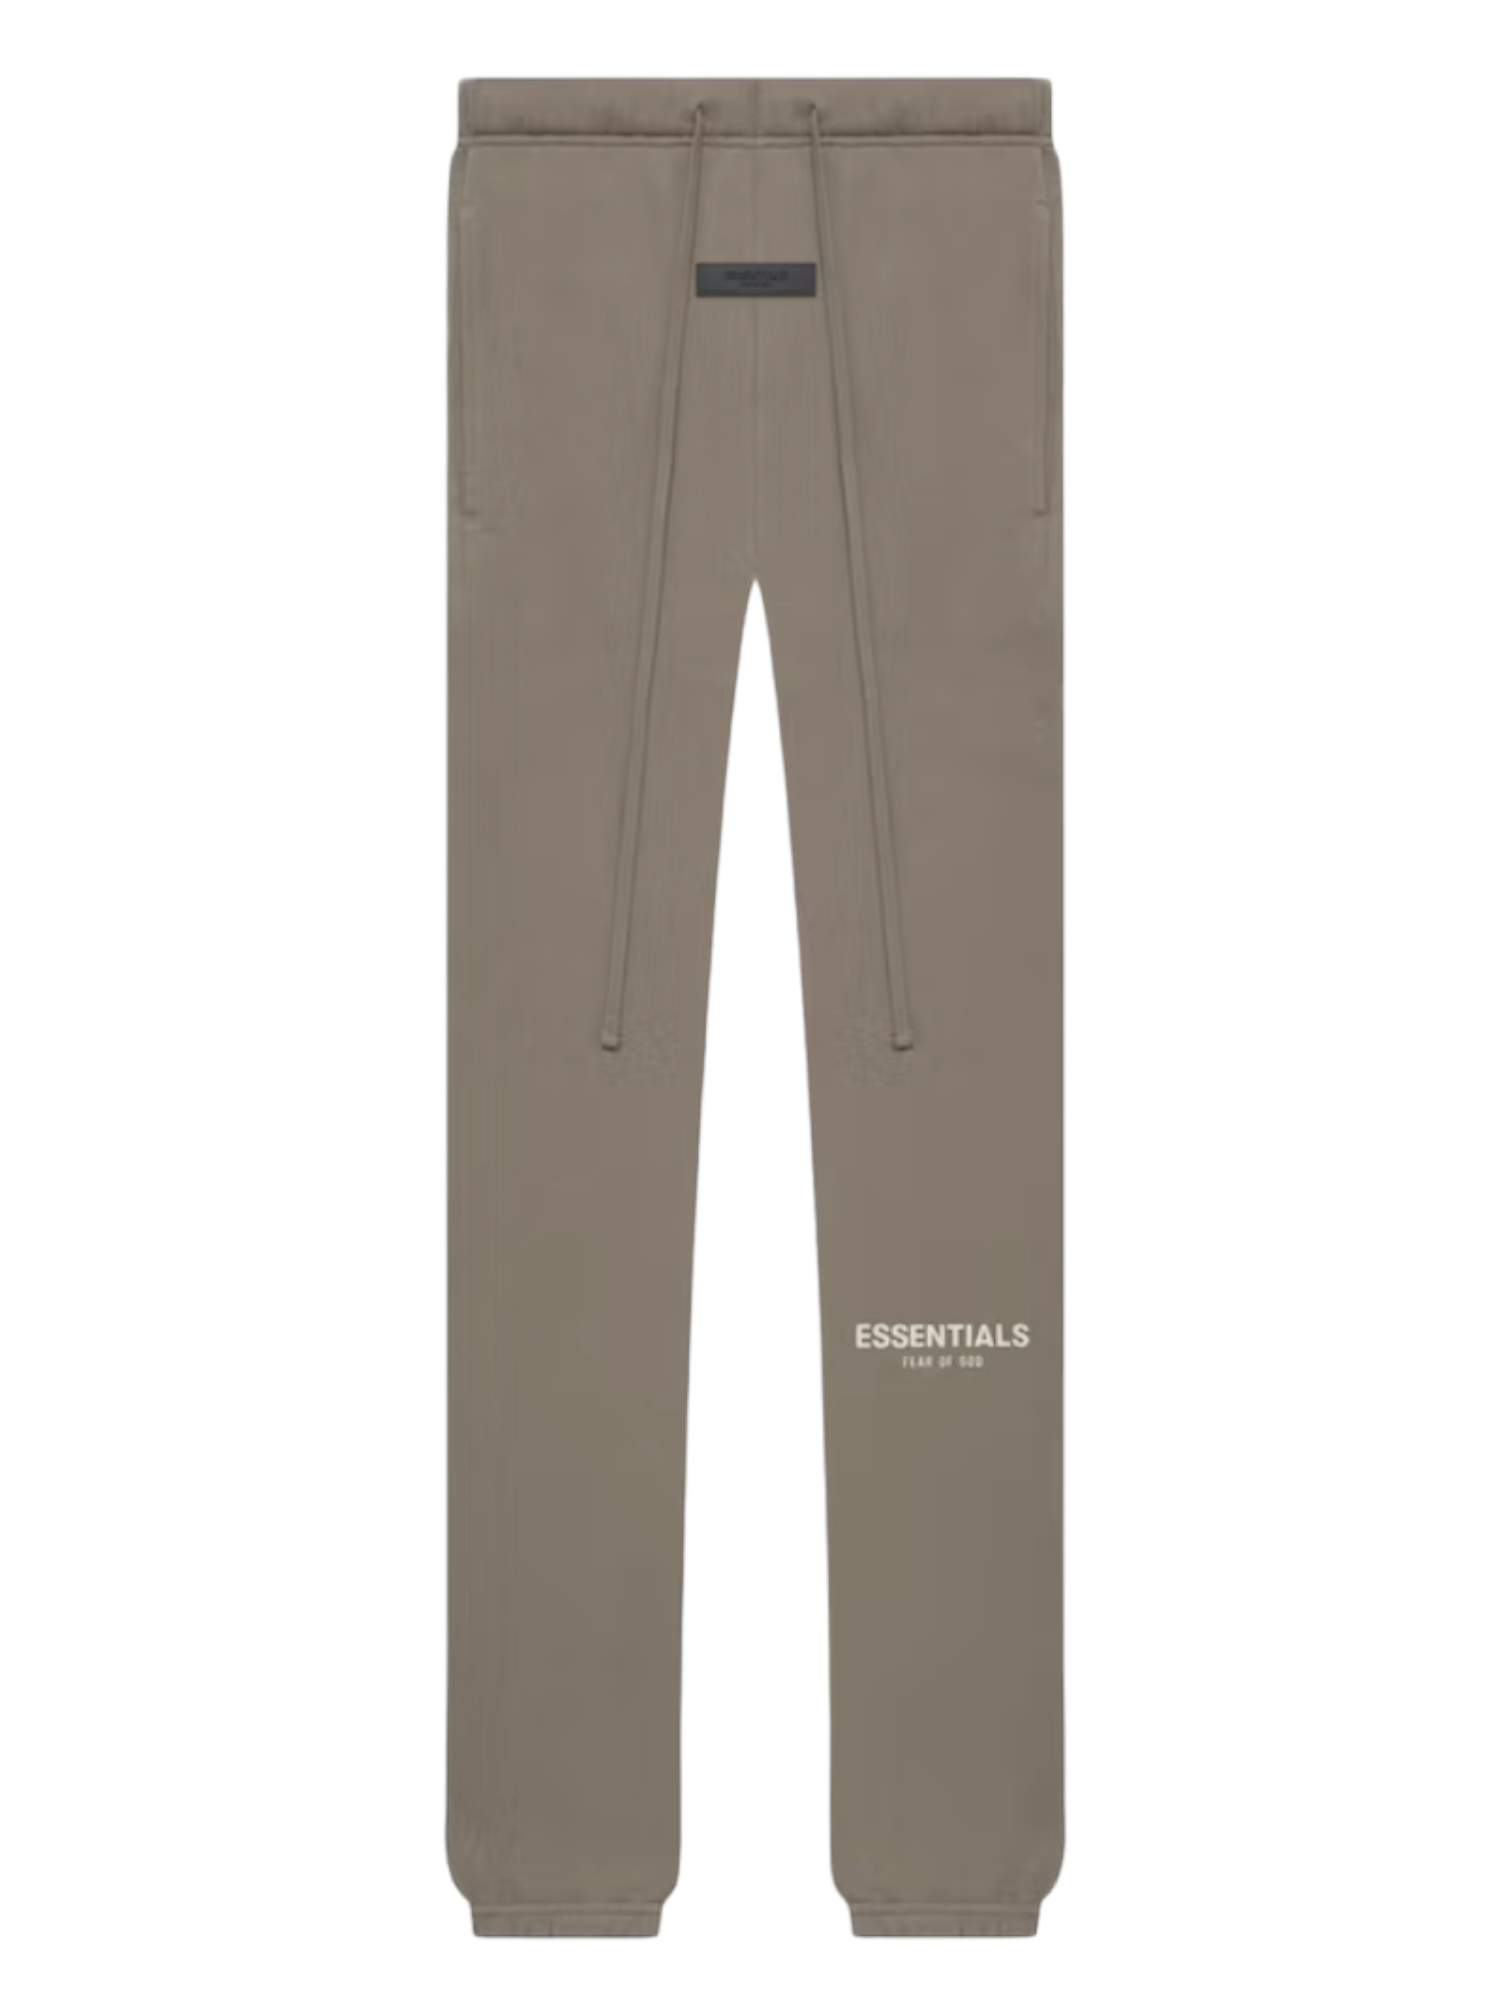 Essentials Fear of God Sweatpants Desert Taupe SS22 - Genuine Design Luxury Consignment Calgary, Canada New & Pre-Owned Authentic Clothing, Shoes, Accessories.